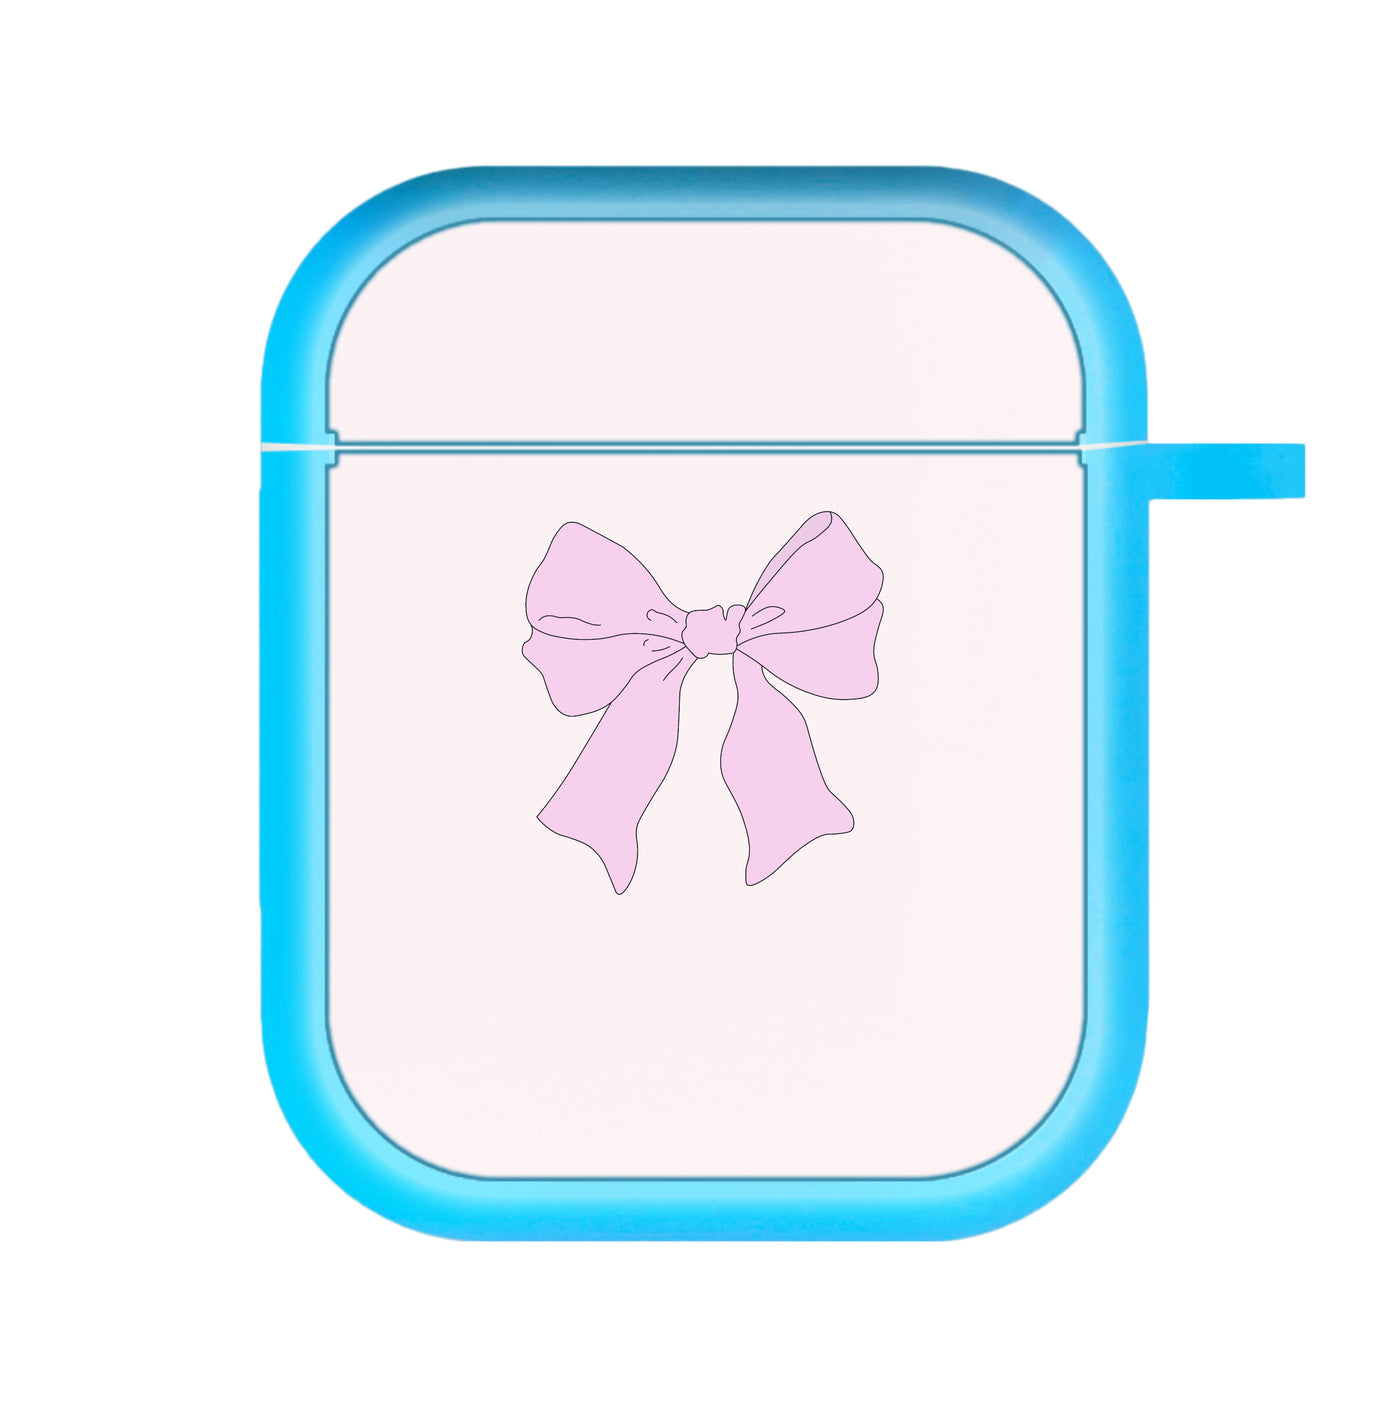 Bow - Clean Girl Aesthetic AirPods Case